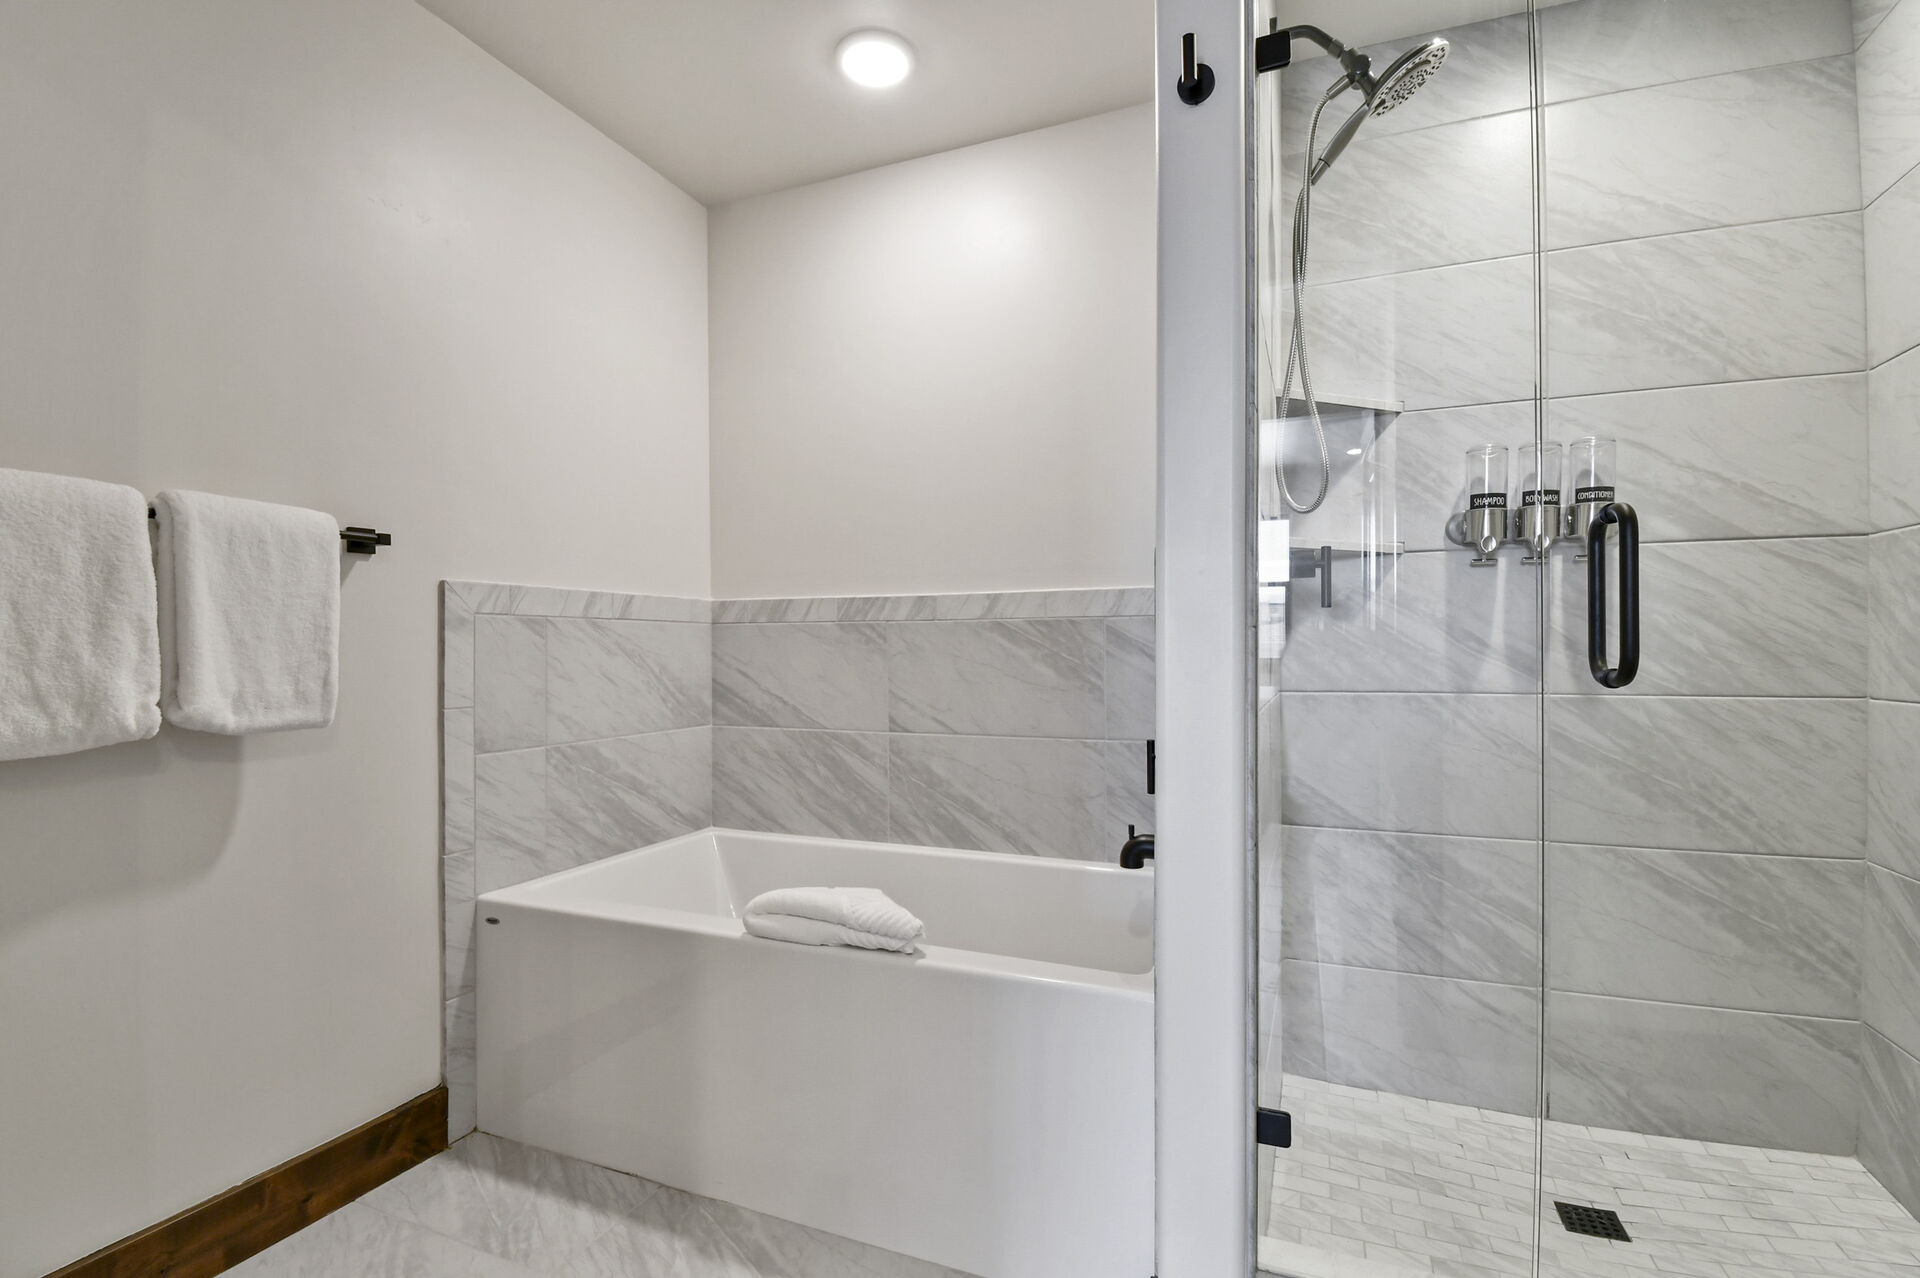 Separate shower and tub